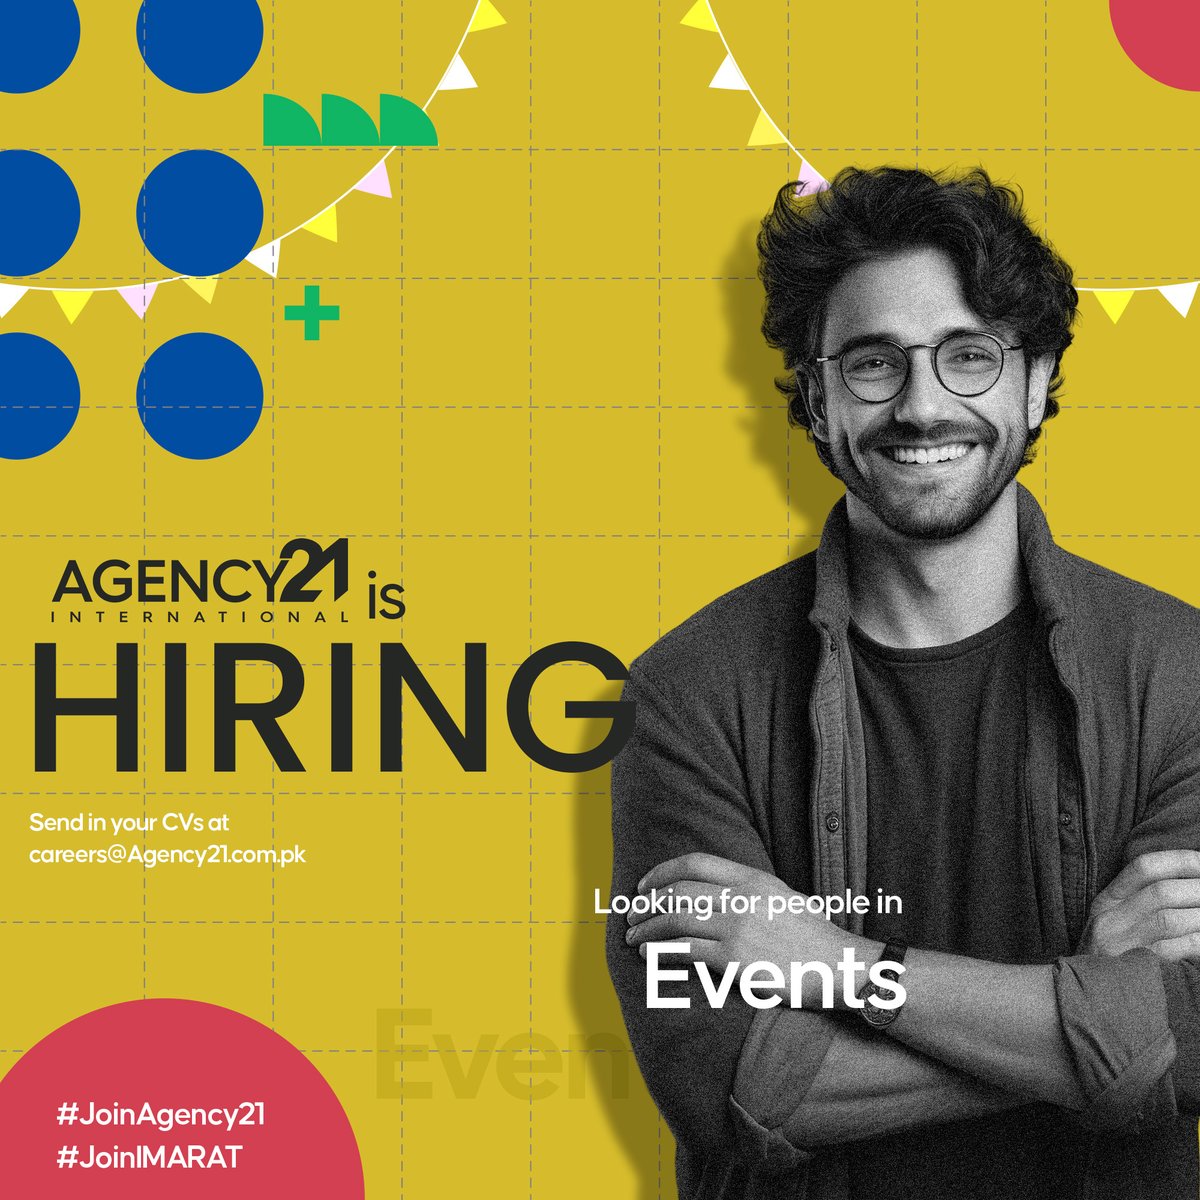 Love planning events? Join Agency21 and be part of our exciting events team! #EventJobs #JoinAgency21